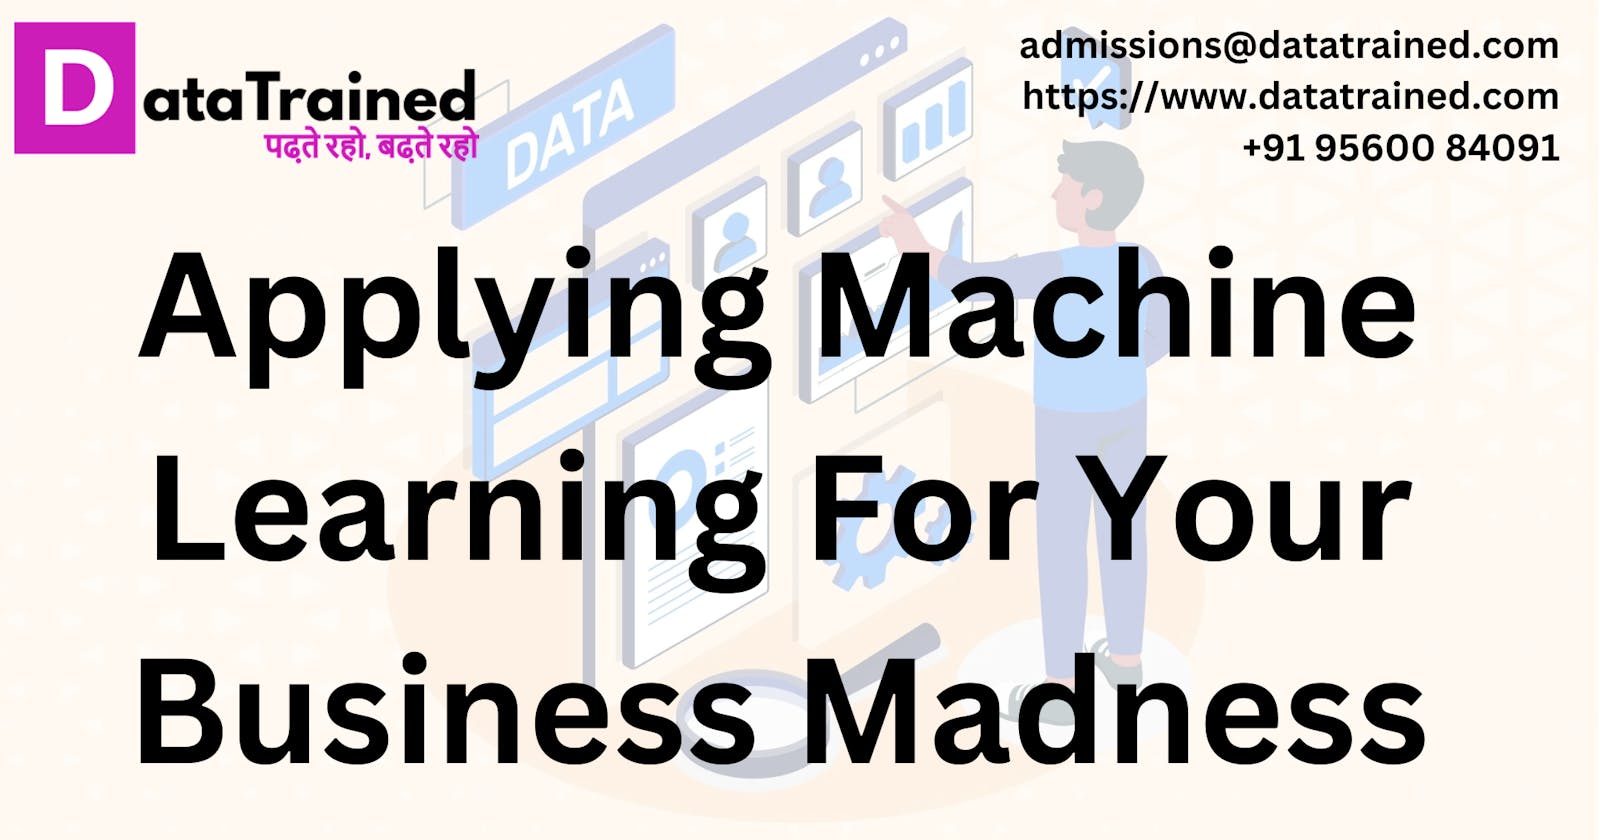 Applying Machine Learning For Your Business Madness